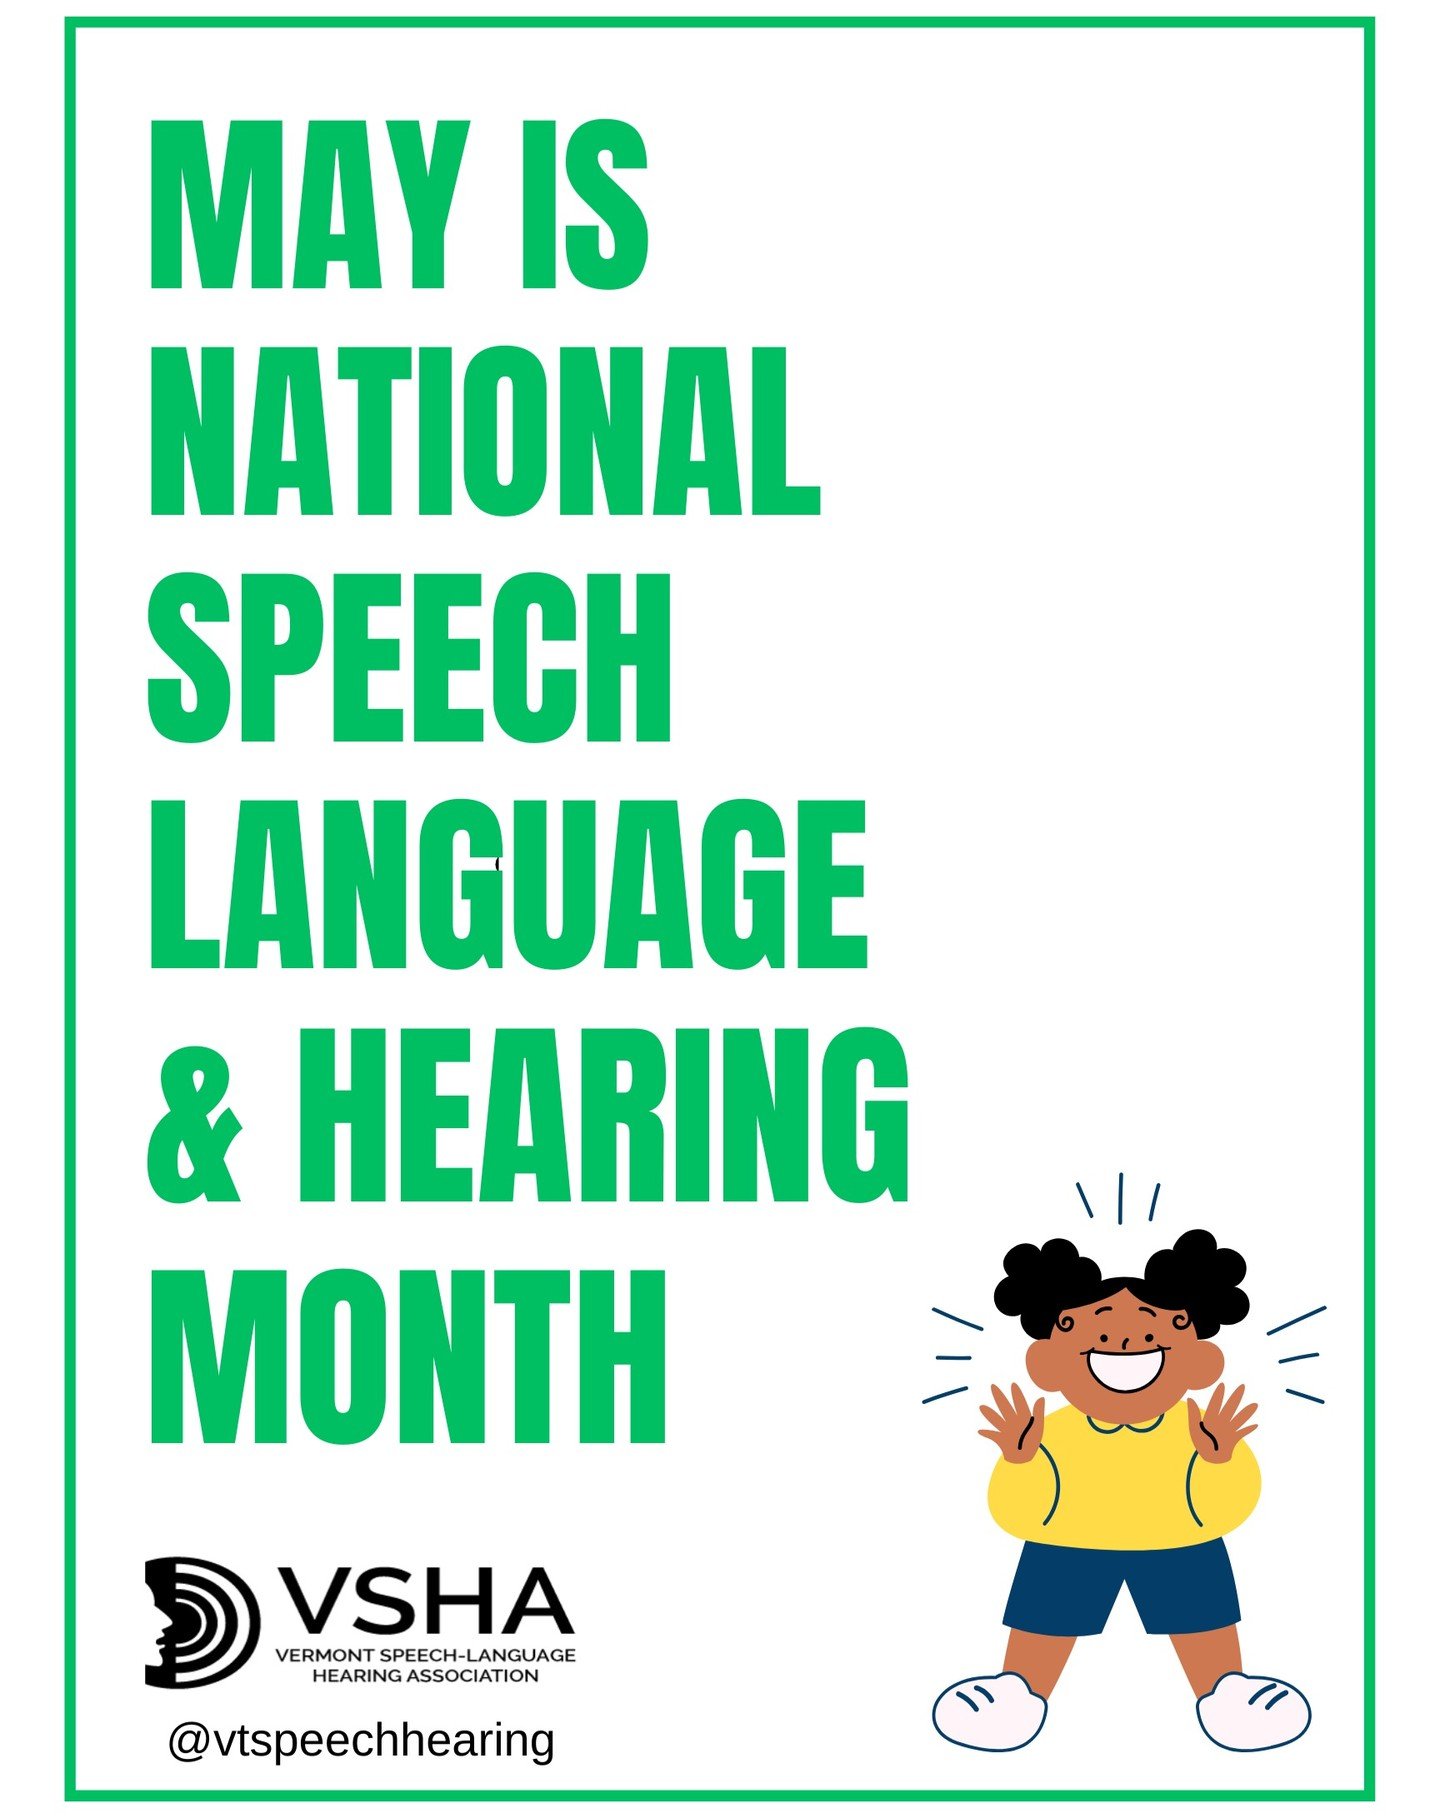 This speech, language, and hearing month, learn more about your state professional organization. We are better when we work together! #vtslp #vtaud